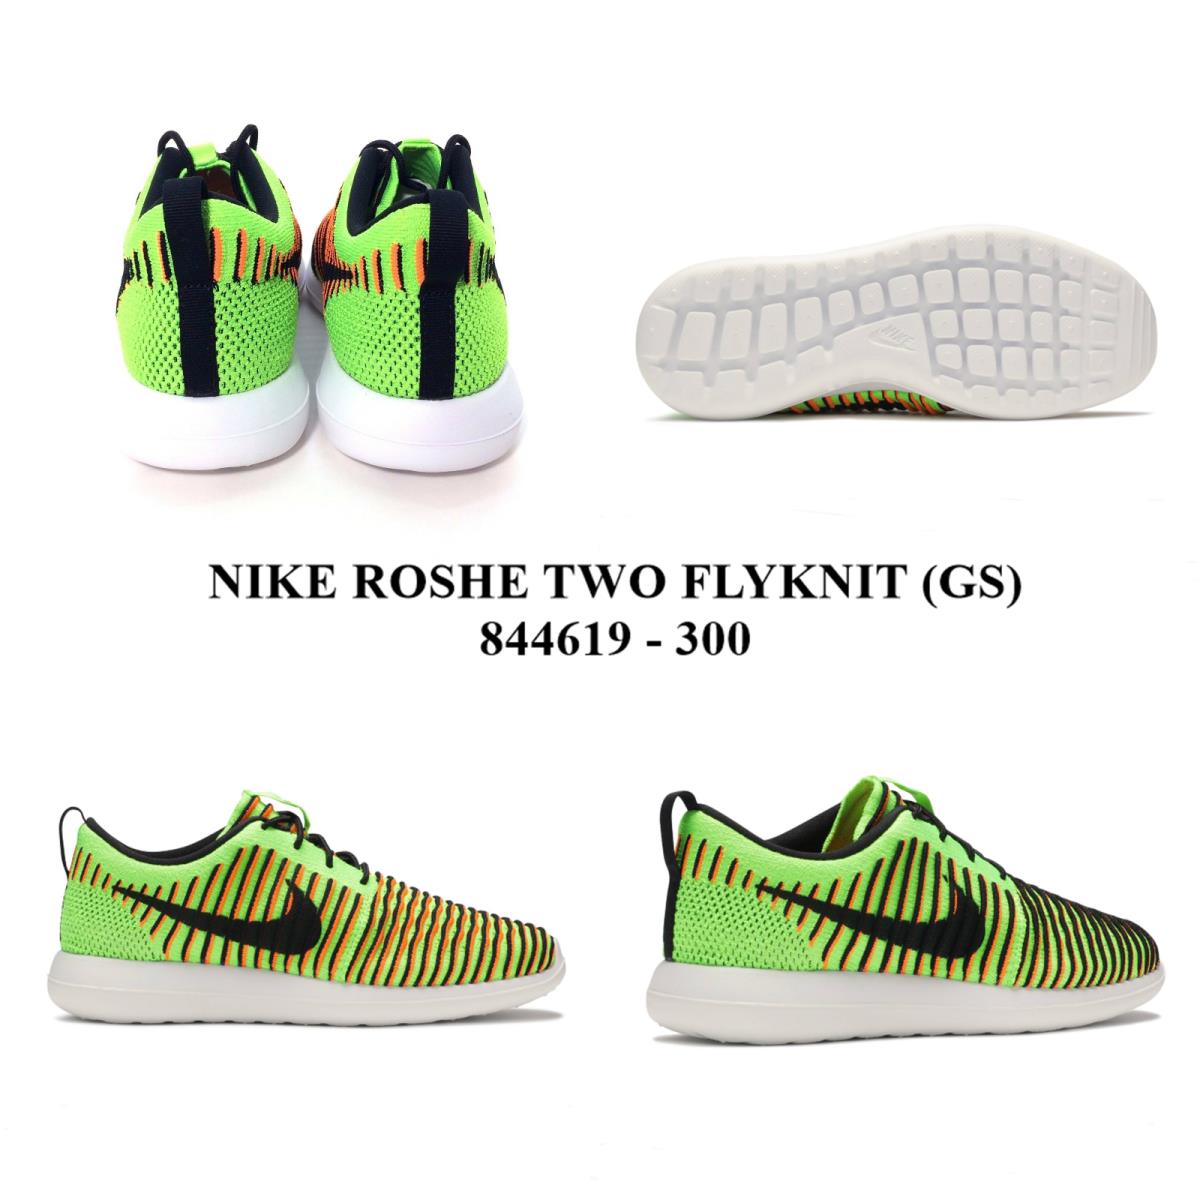 Nike Roshe Two Flyknit GS 844619 - 300 Casual Sneakers Shoes NO Lid - Green